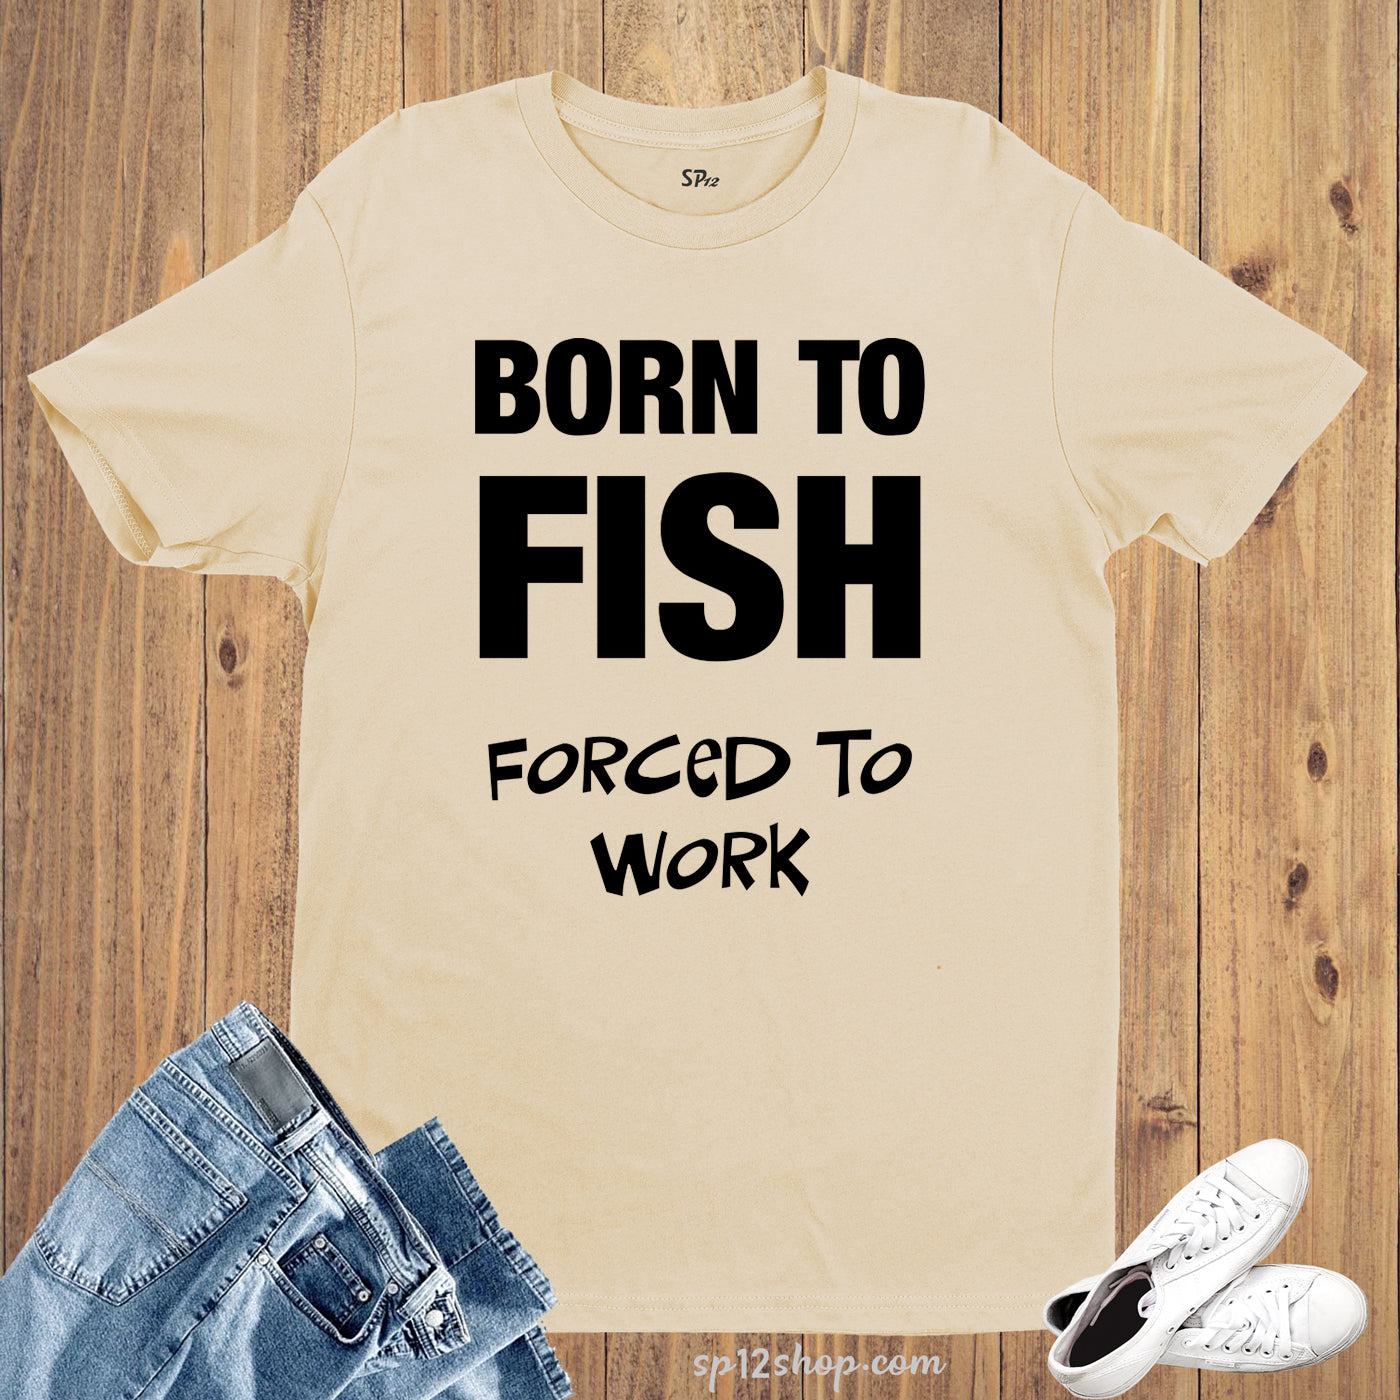 Born To Fish Forced To Work Funny Slogan Hobby T shirt